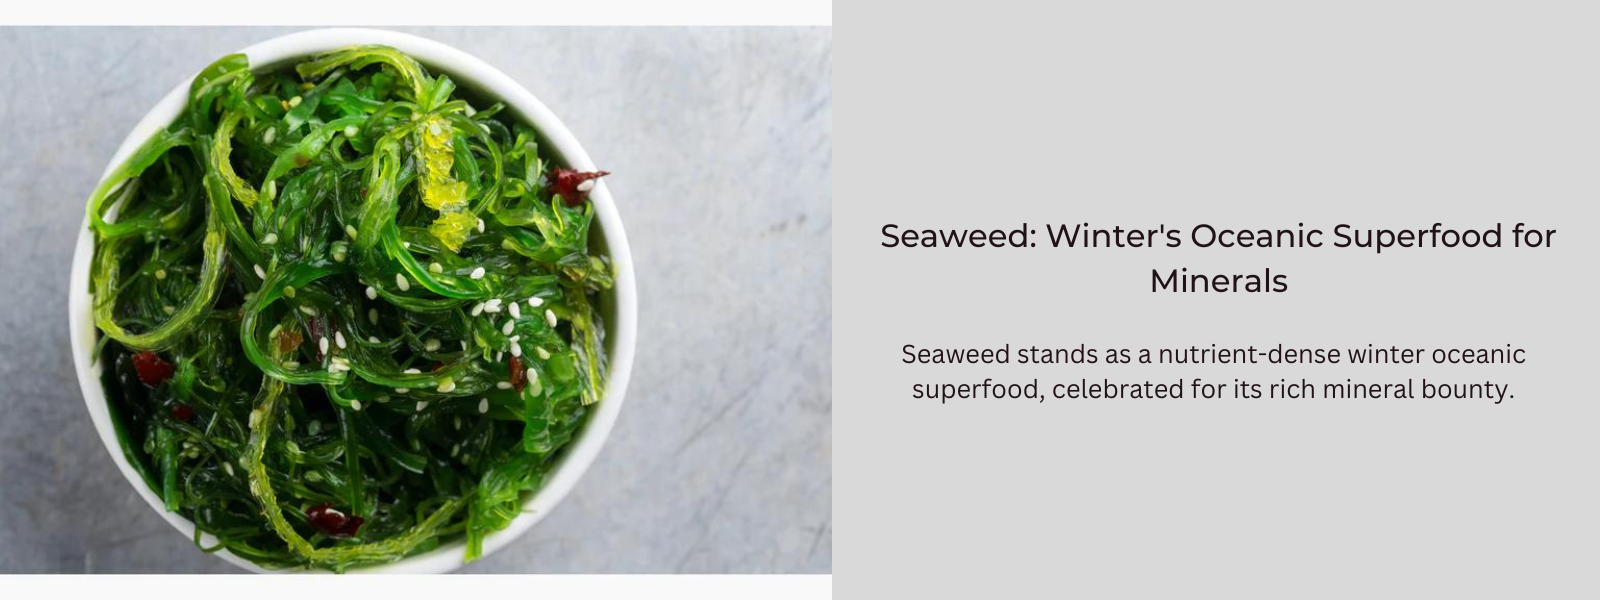 Seaweed: Winter's Oceanic Superfood for Minerals